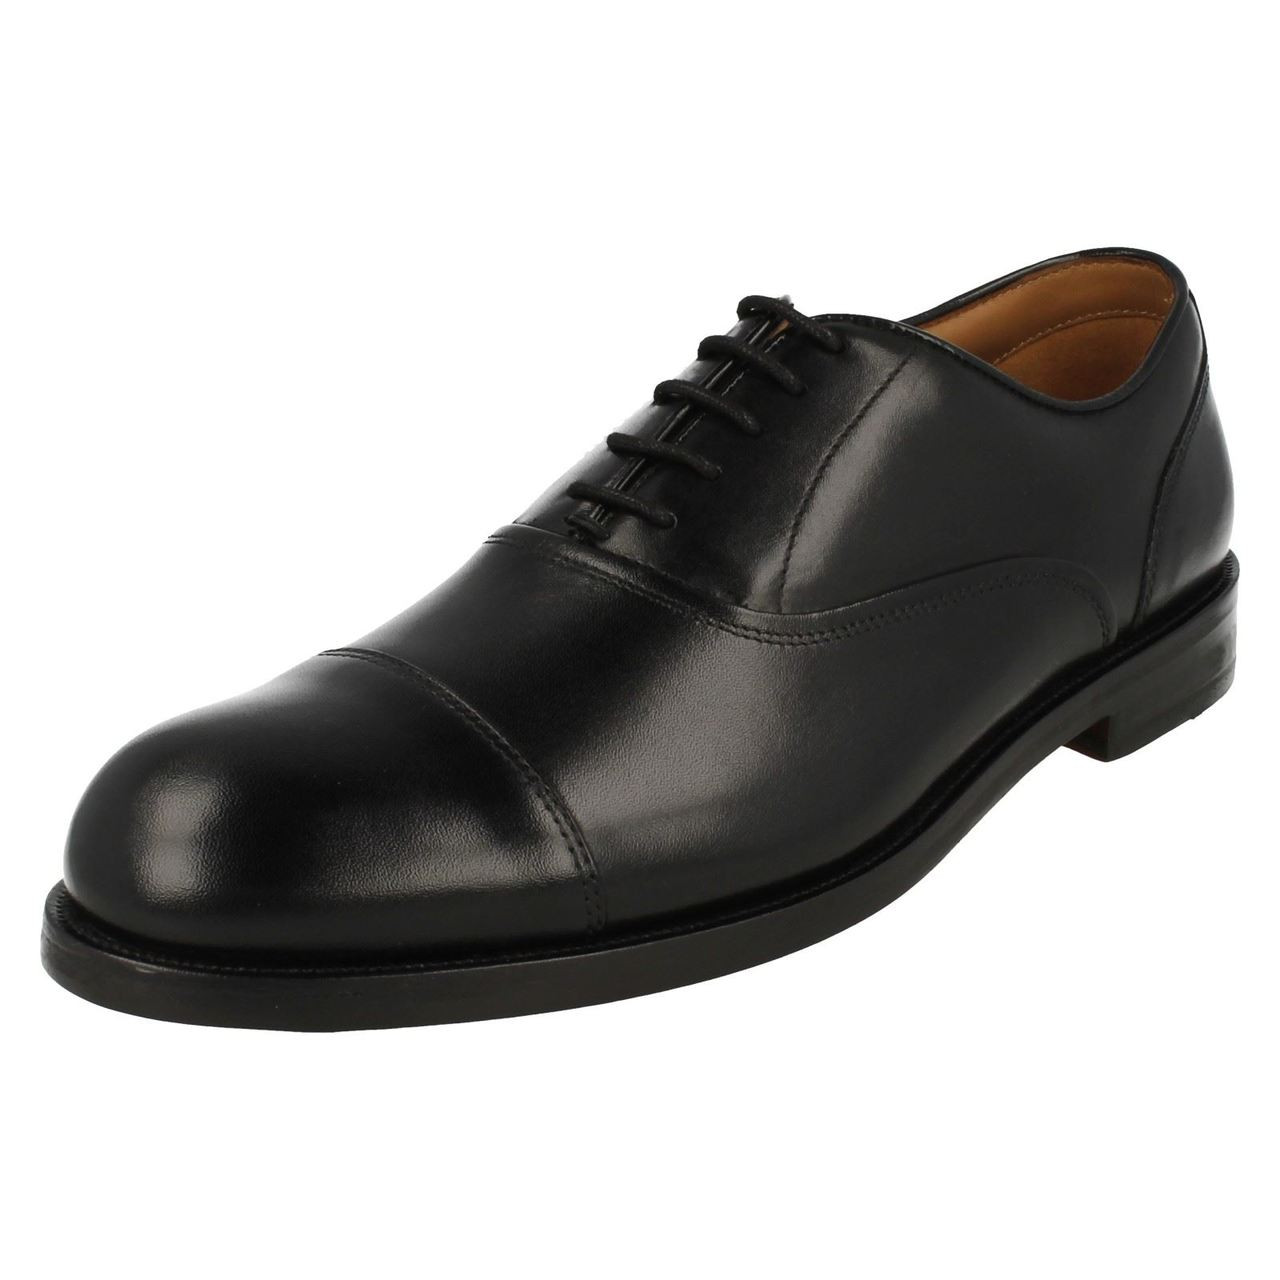 Mens Clarks Formal Oxford Style Shoes 